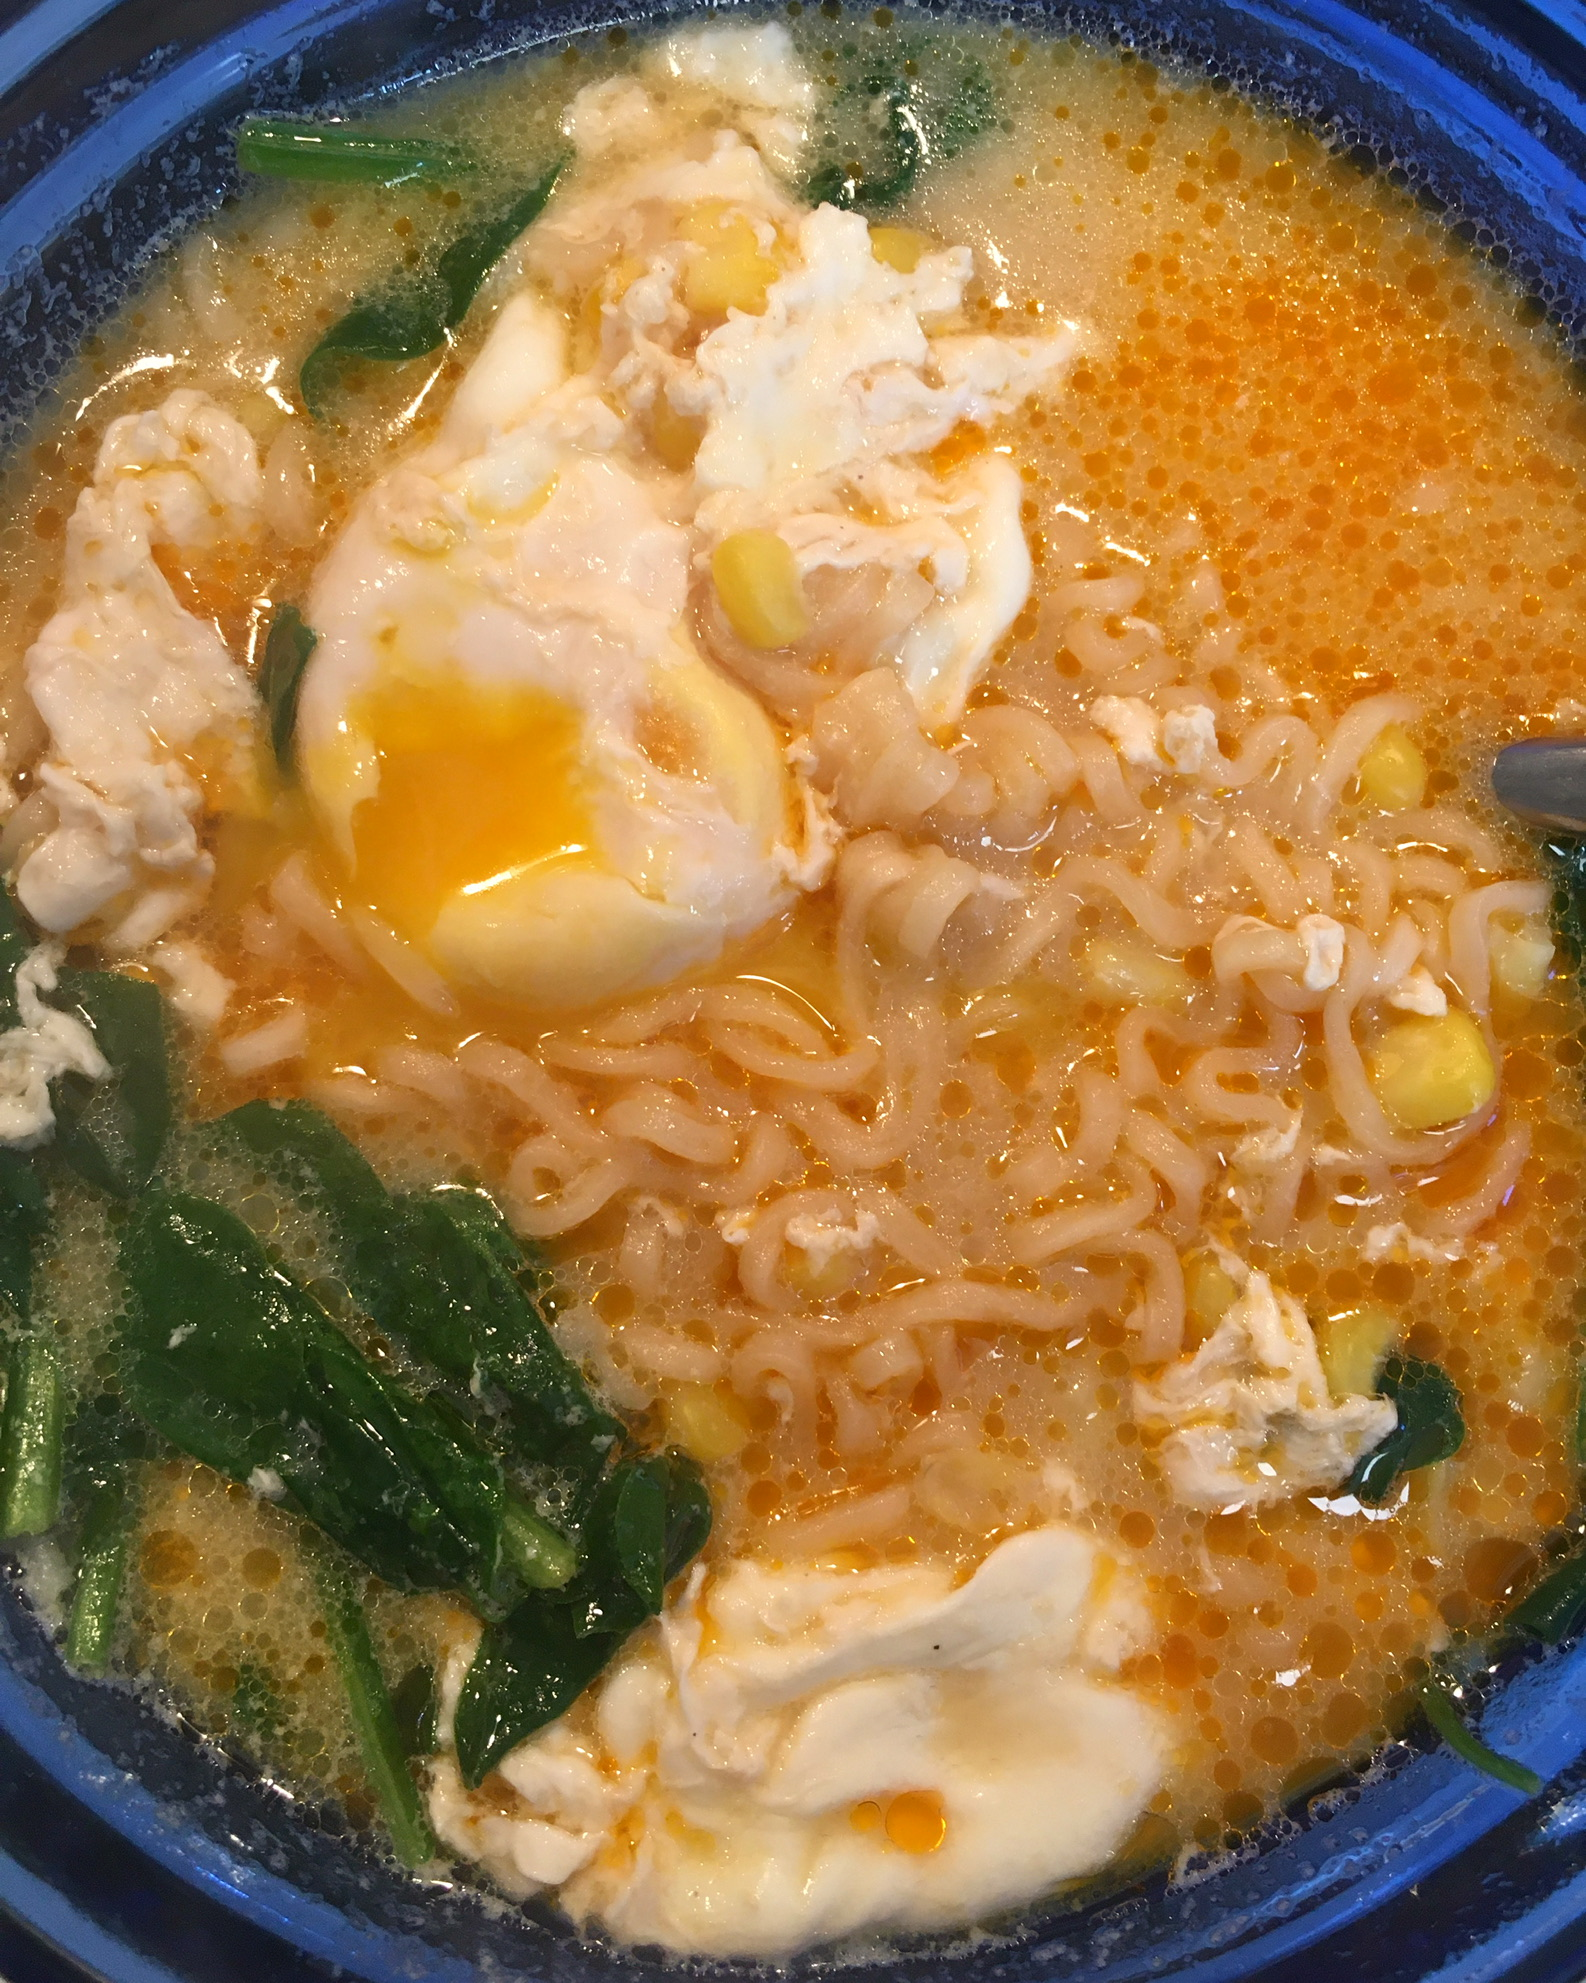 A blue bowl holds a noodle soup, with corn, poached egg, and spinach.